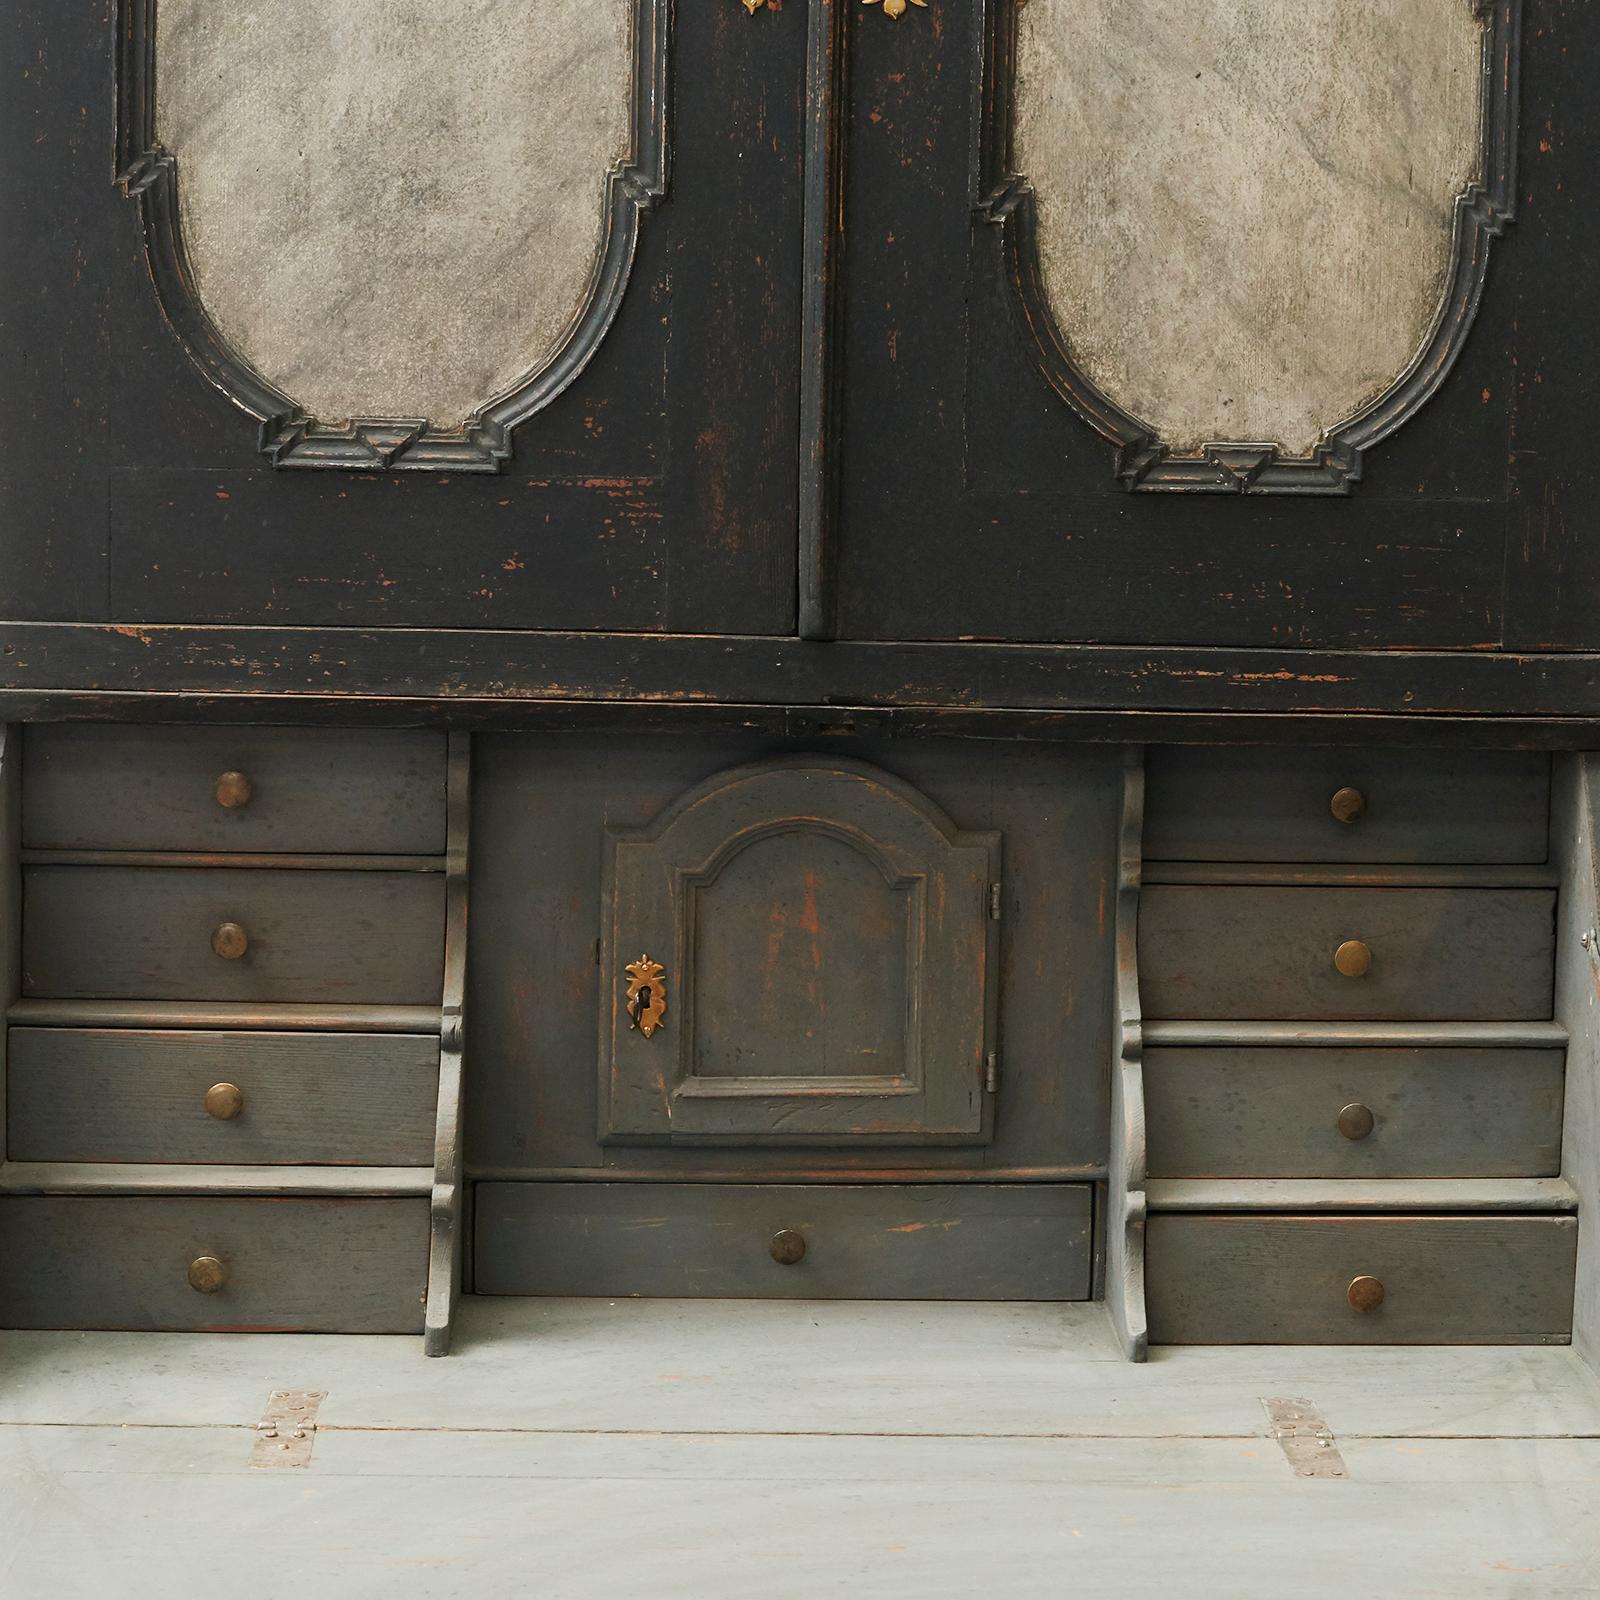 Baroque bureau, Sweden, circa 1750. Black-painted pine with gray-lined fillings. Behind the writing flap are numerous drawers in deep, grey color. A powerful and distinctive bureau (in 2 parts).